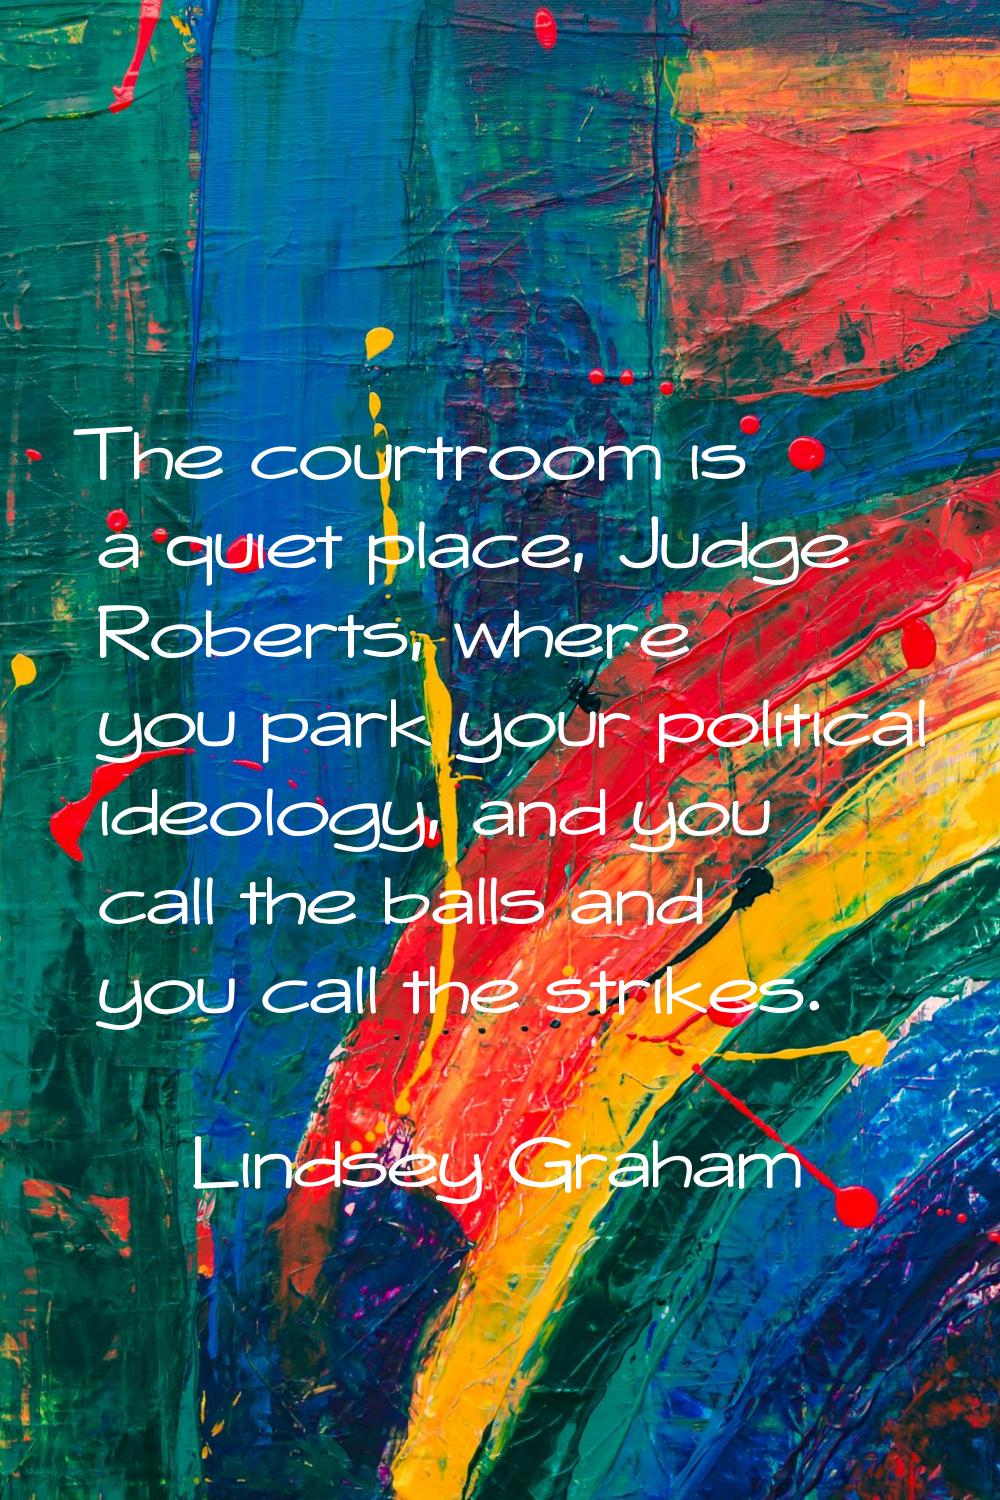 The courtroom is a quiet place, Judge Roberts, where you park your political ideology, and you call